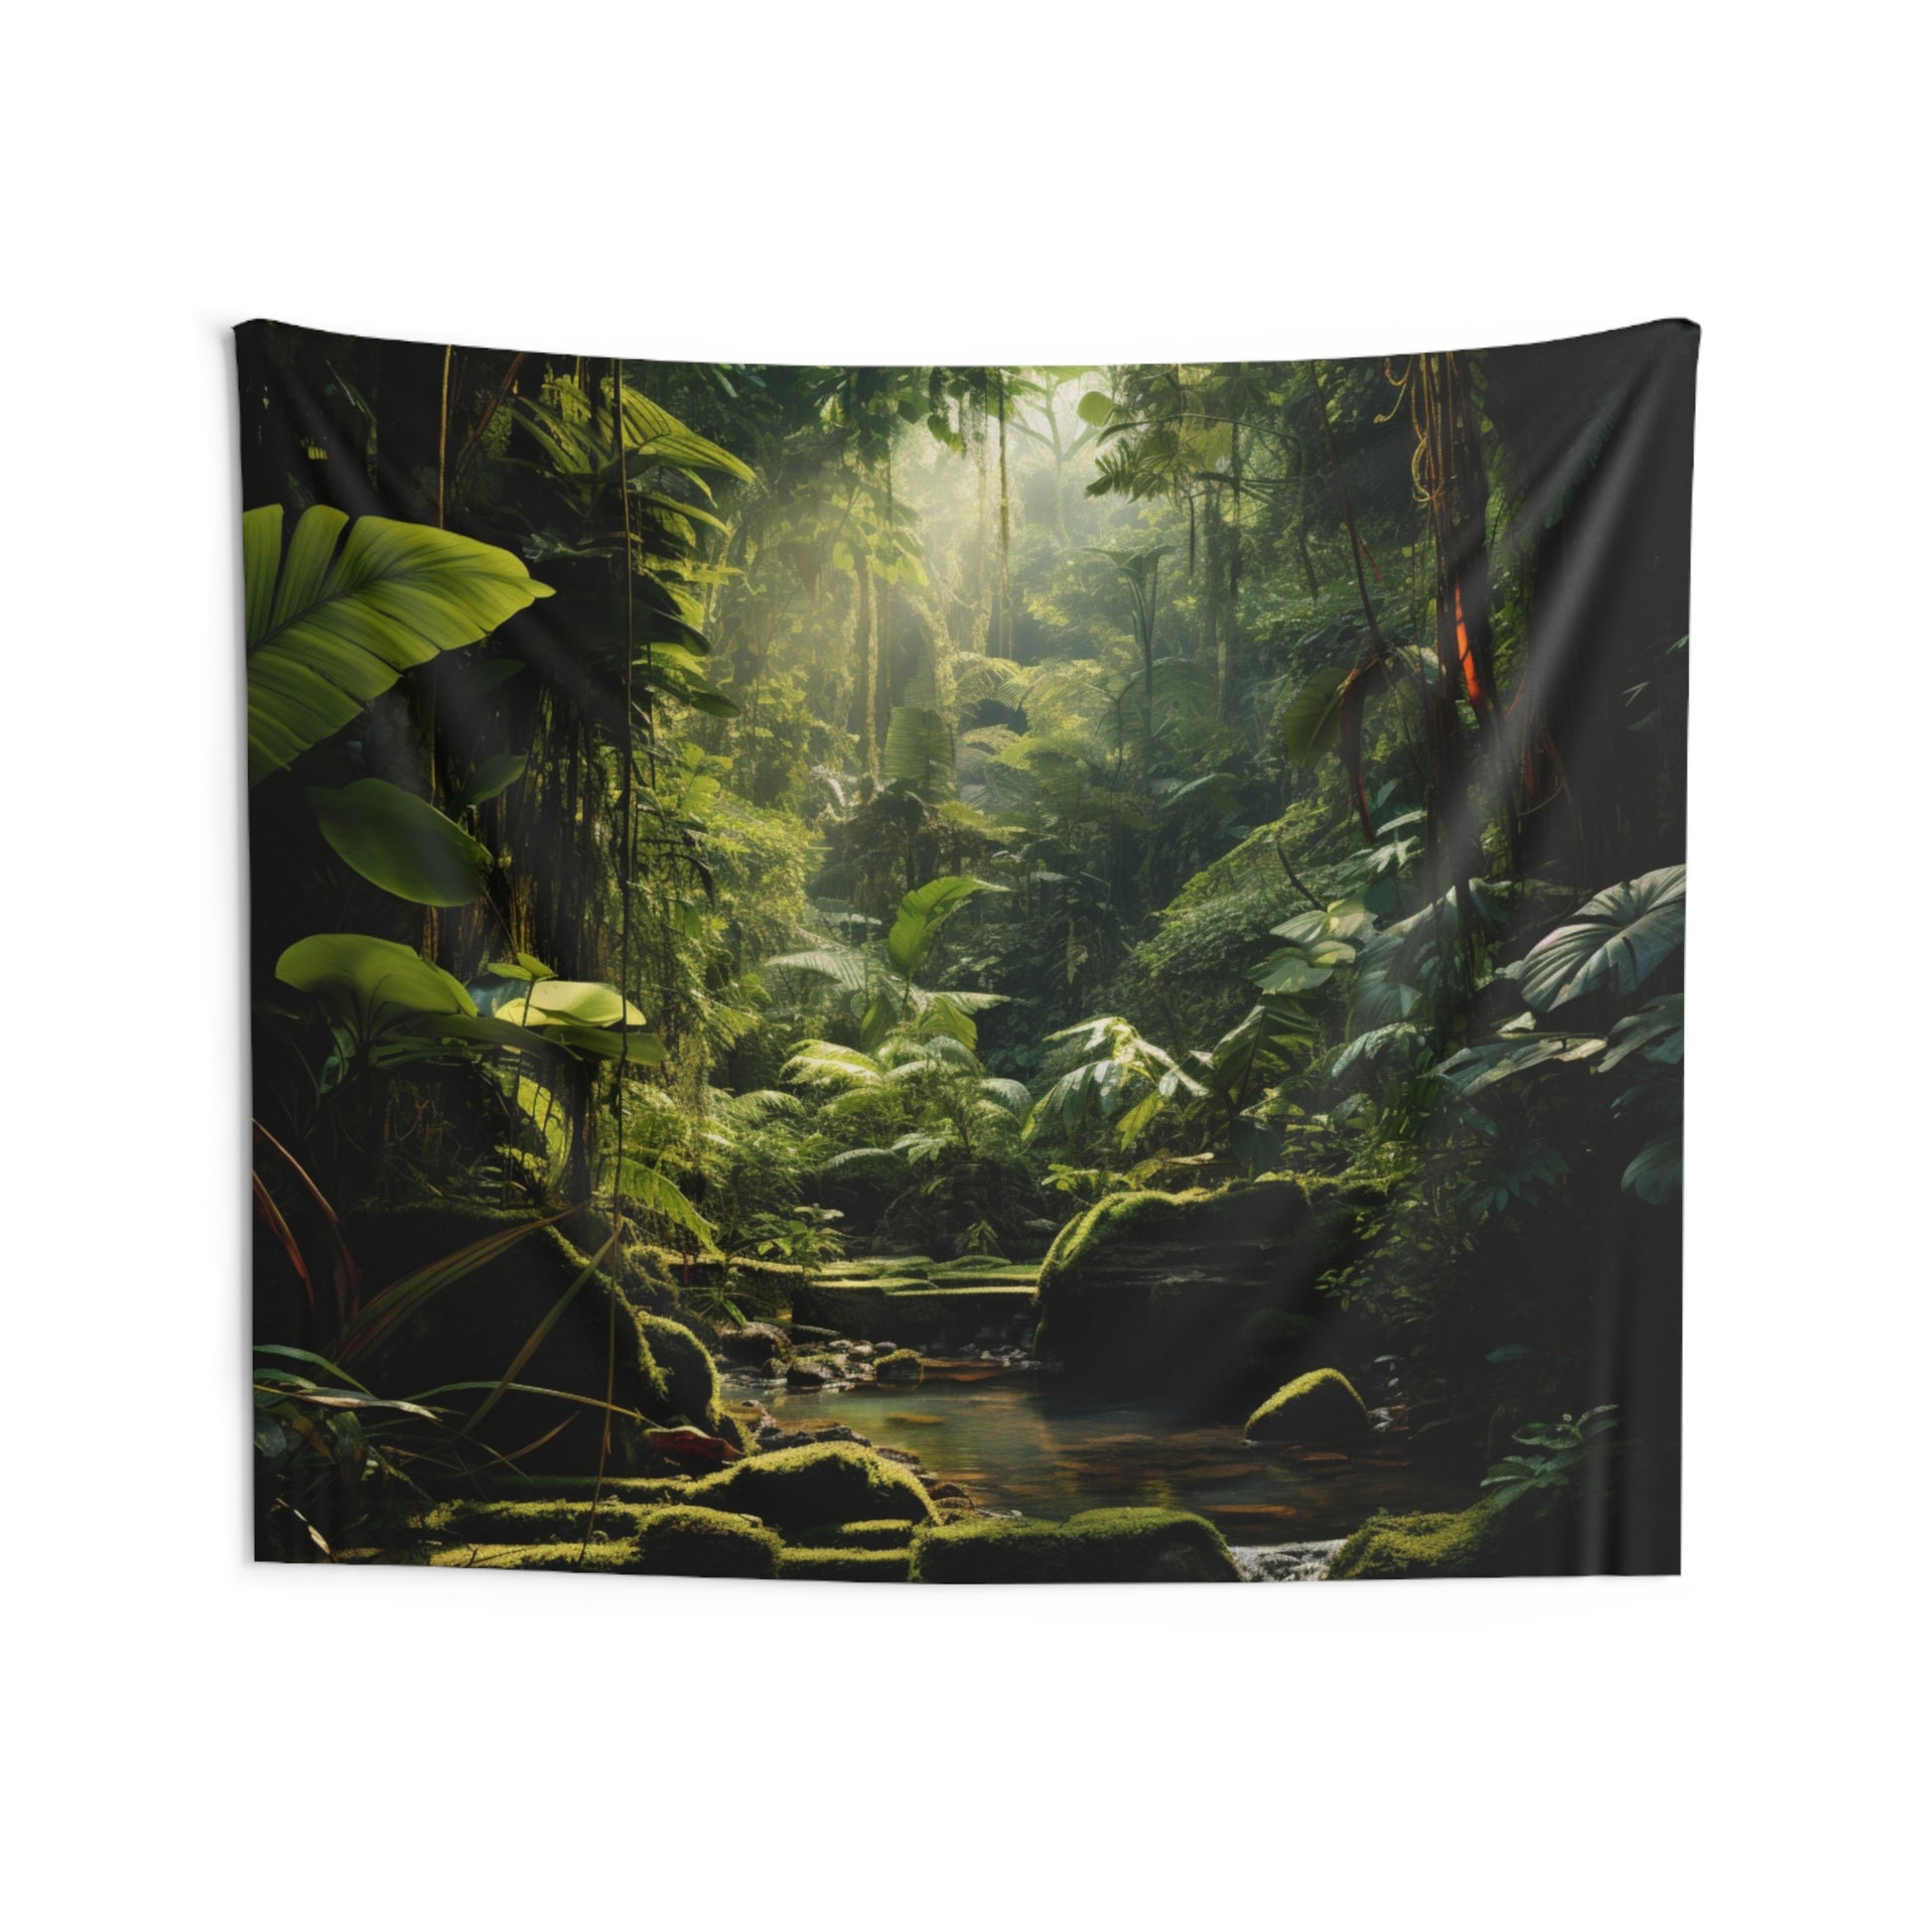 Rainforest Jungle Tapestry, Green Nature Wall Art Hanging Cool Unique Landscape Aesthetic Large Small Decor Bedroom College Dorm Room Starcove Fashion